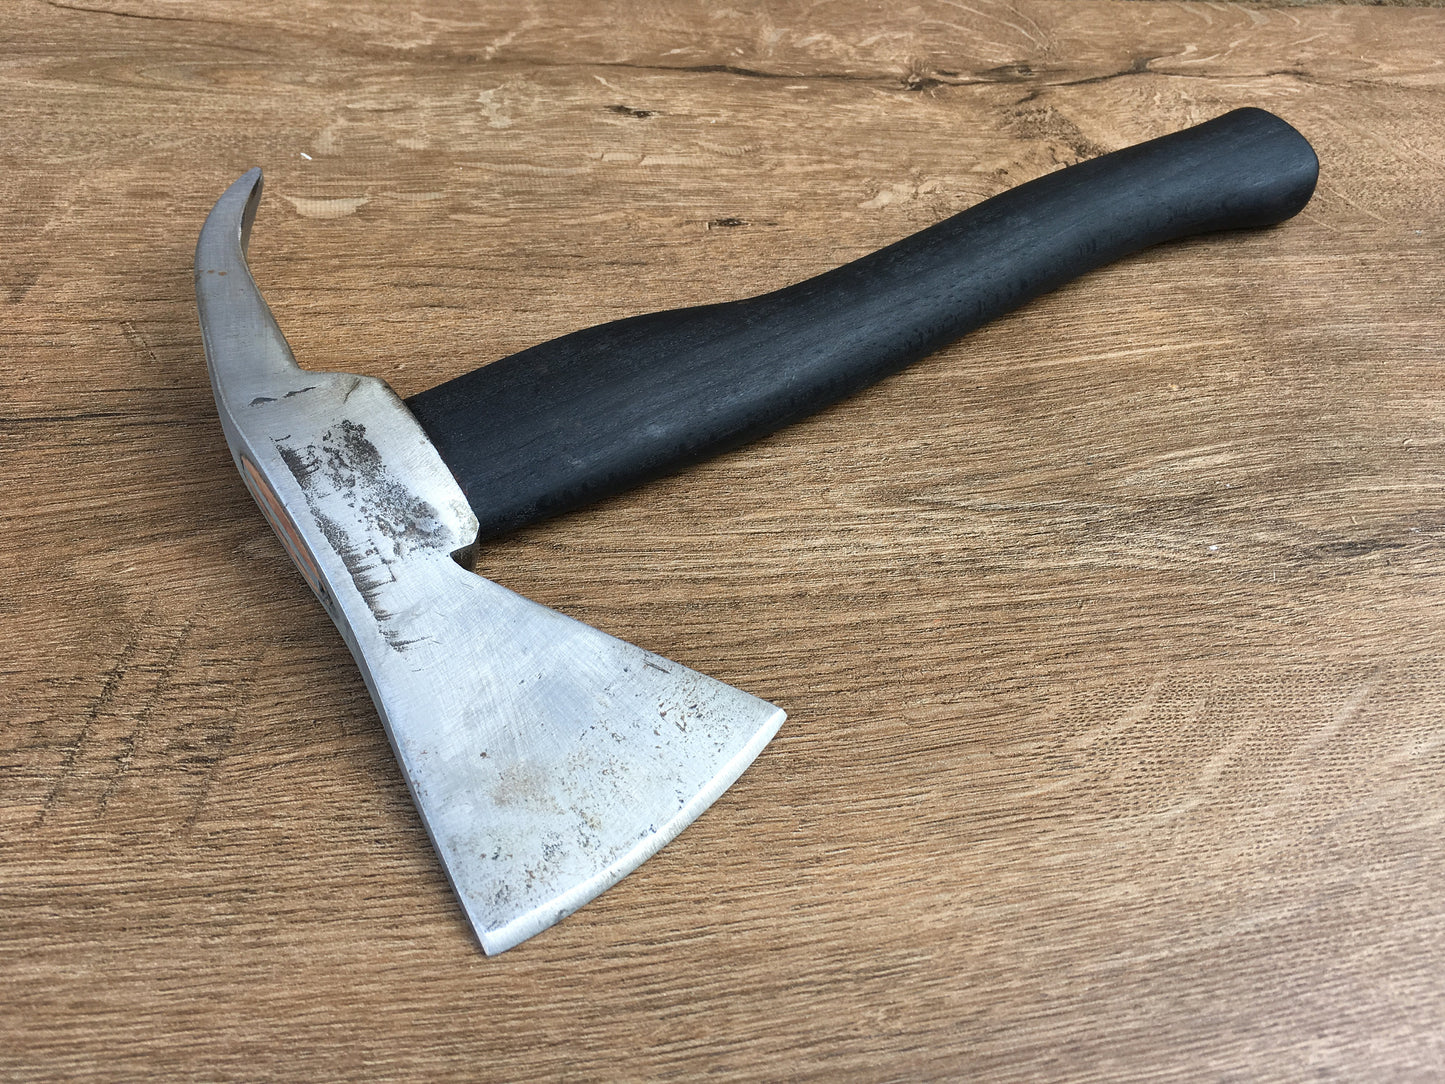 Viking axe, tomahawk, hatchet, mens gifts, medieval axe, iron gift for man,viking camp, Norse axe, viking camp kit, viking gifts, iron gifts